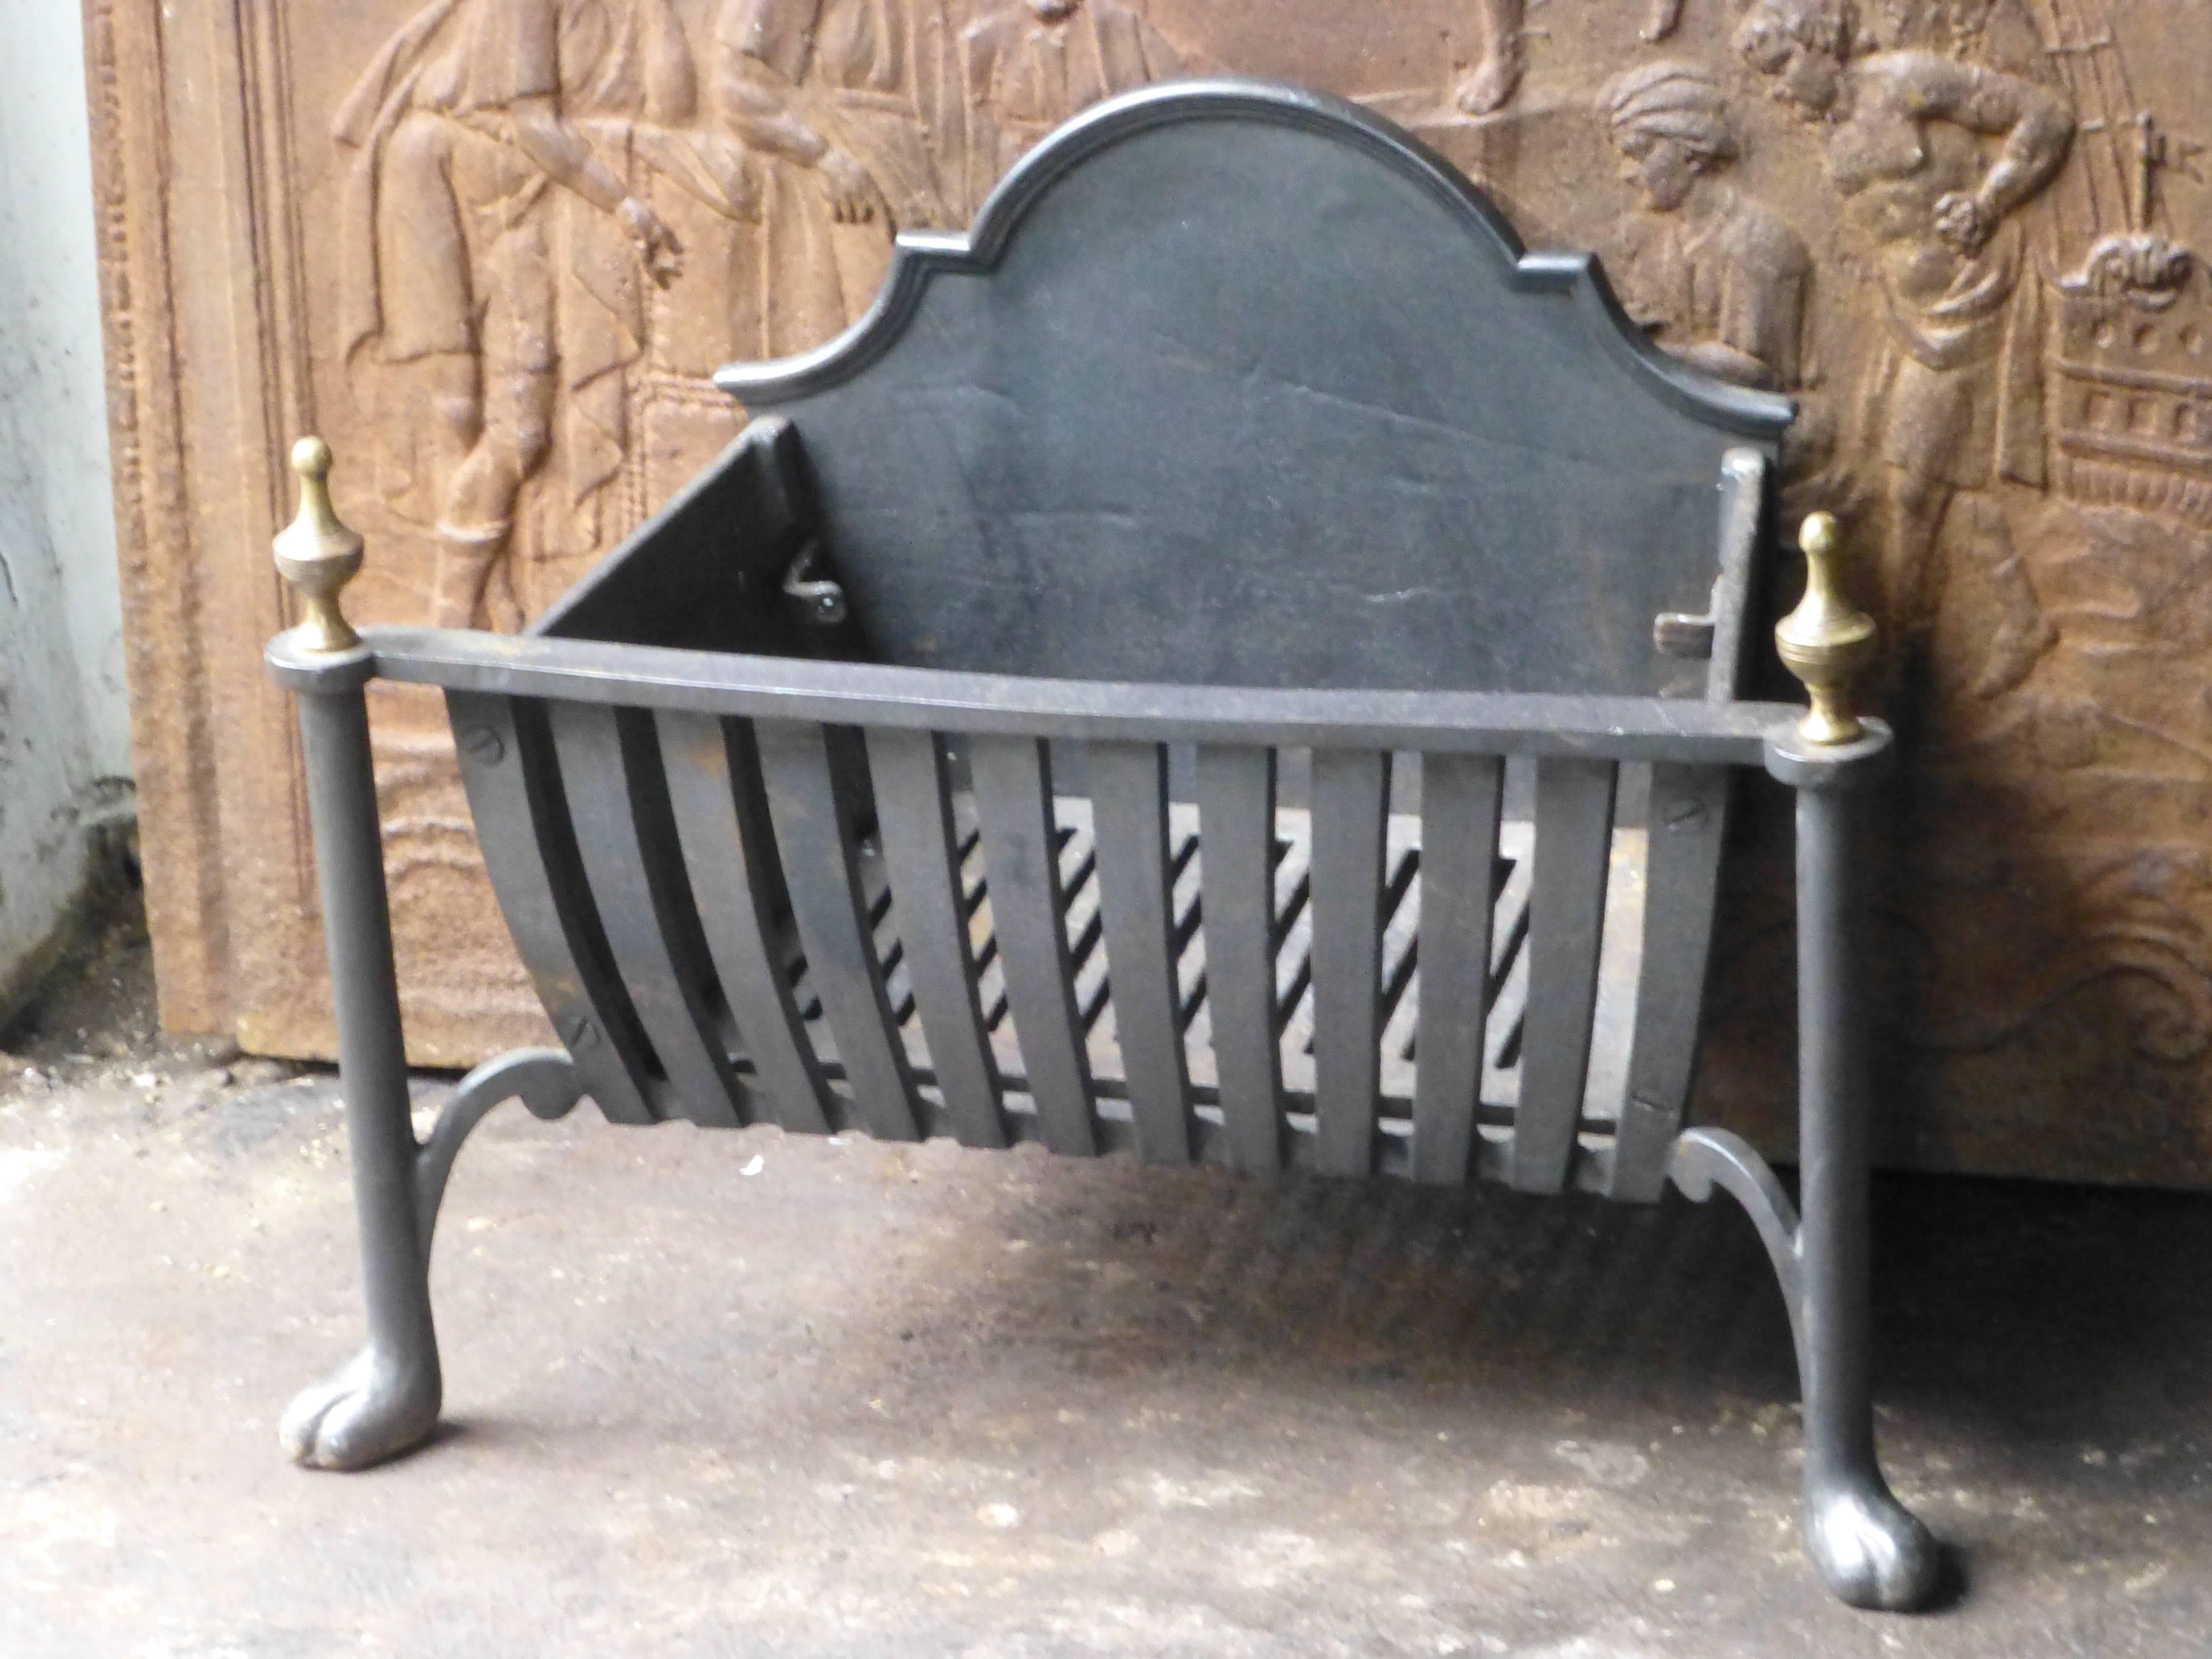 We always have a nice collection of antique fireplace baskets - fire baskets in stock that can be ordered on line. See our website for our current stock and prices of firegrates and firebaskets.
